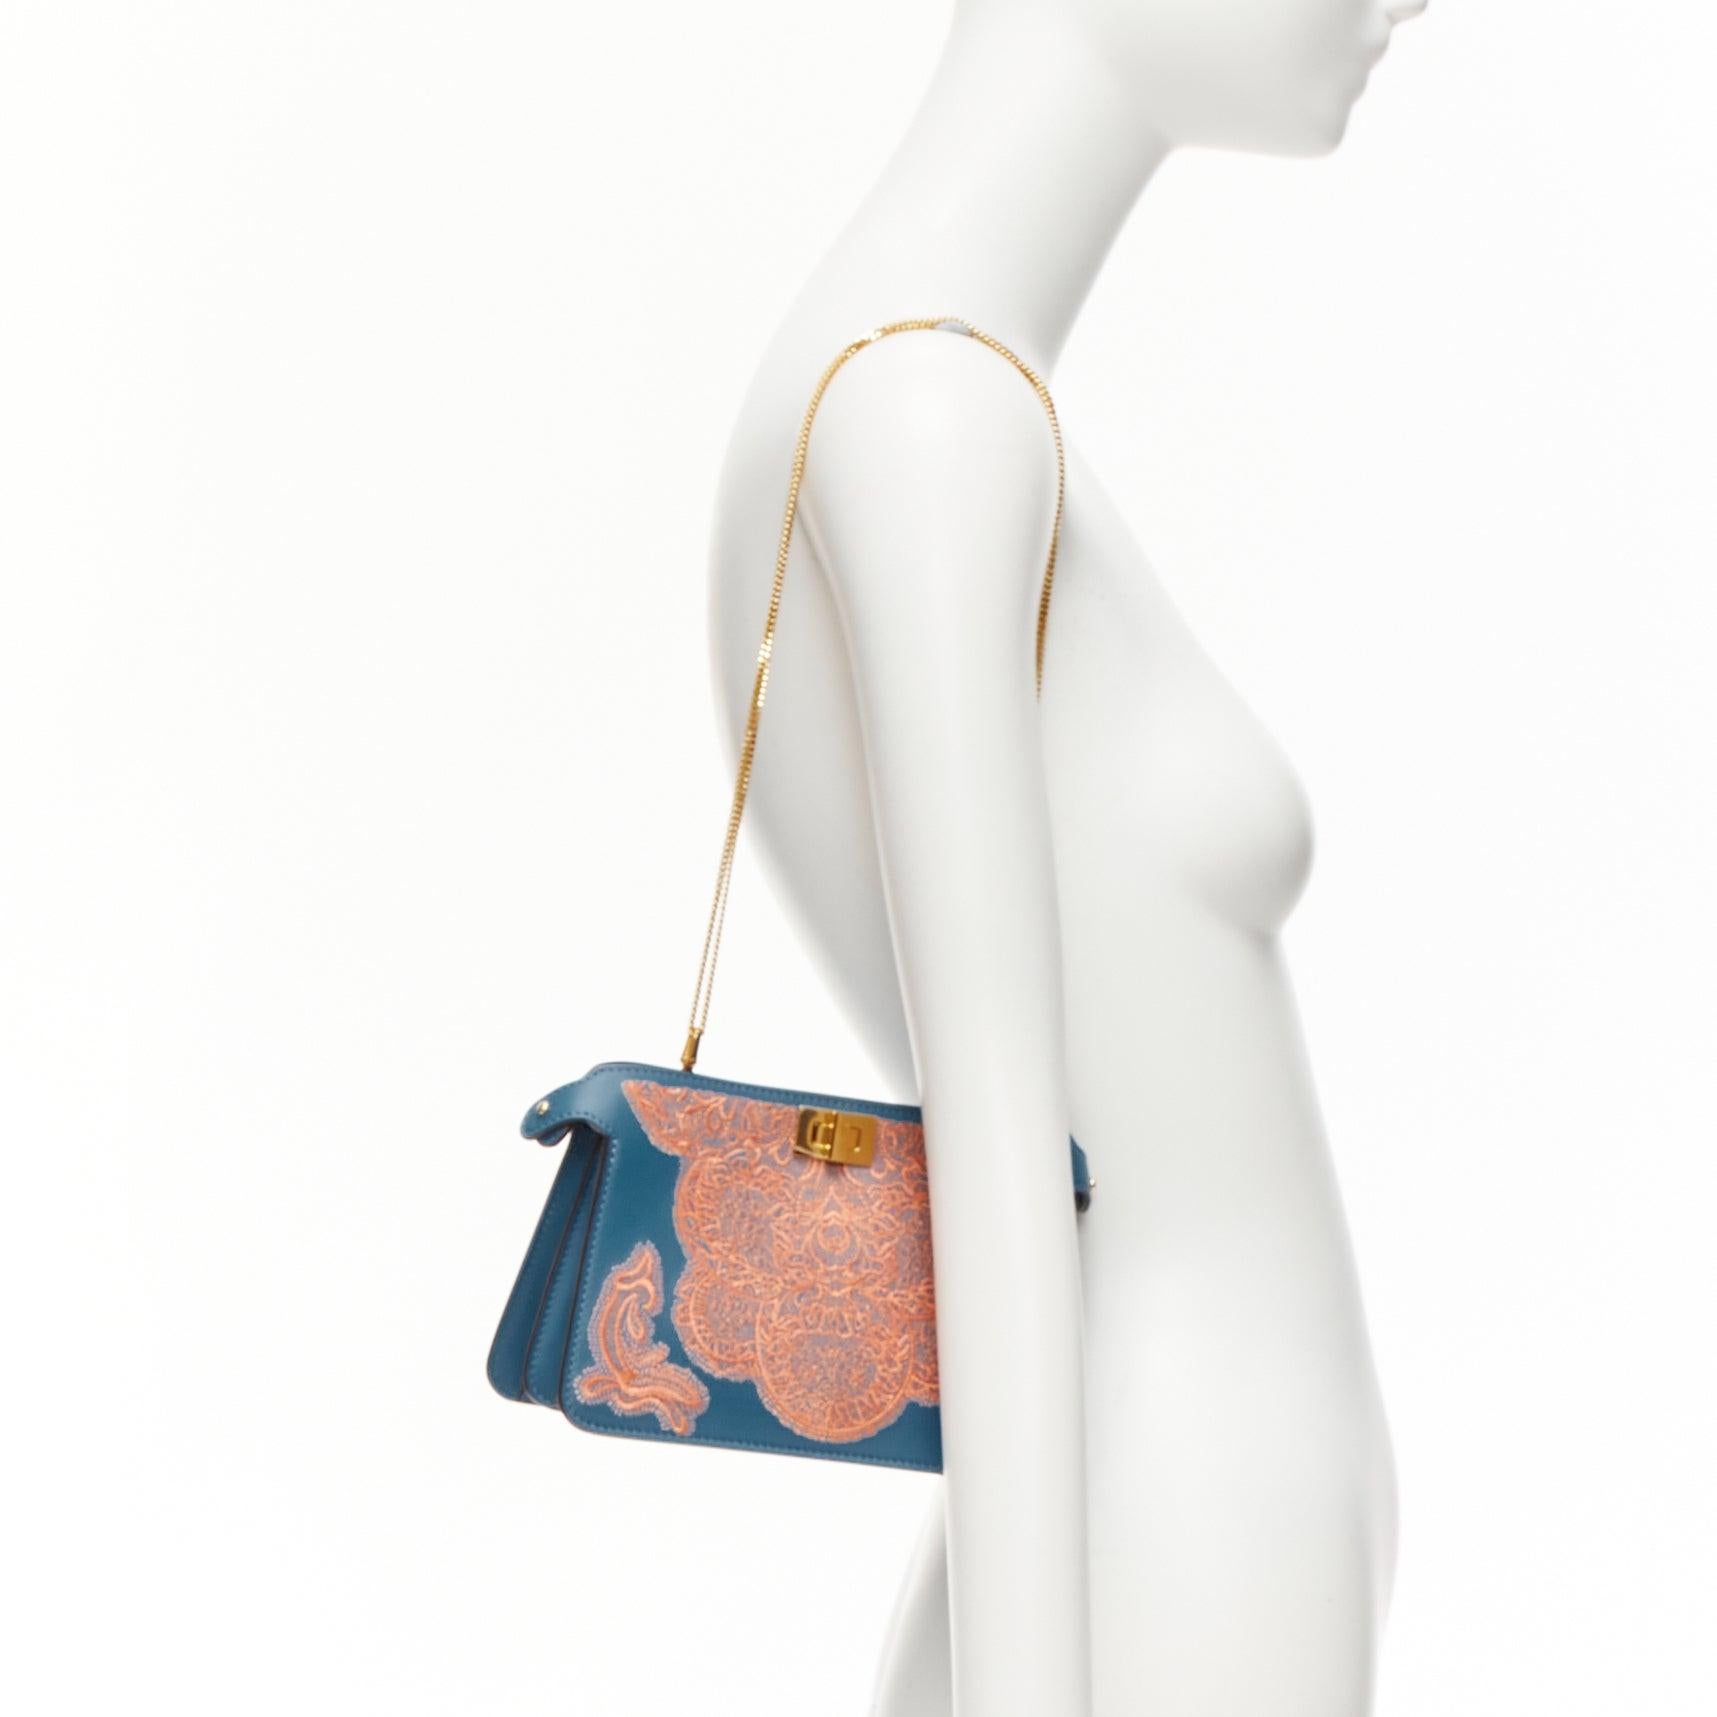 FENDI Peekaboo pink lace applique blue leather gold buckle crossbody bag
Reference: AAWC/A00942
Brand: Fendi
Model: Peekaboo
Material: Leather
Color: Blue, Pink
Pattern: Lace
Closure: Turnlock
Lining: Blue Leather

CONDITION:
Condition: Unworn in